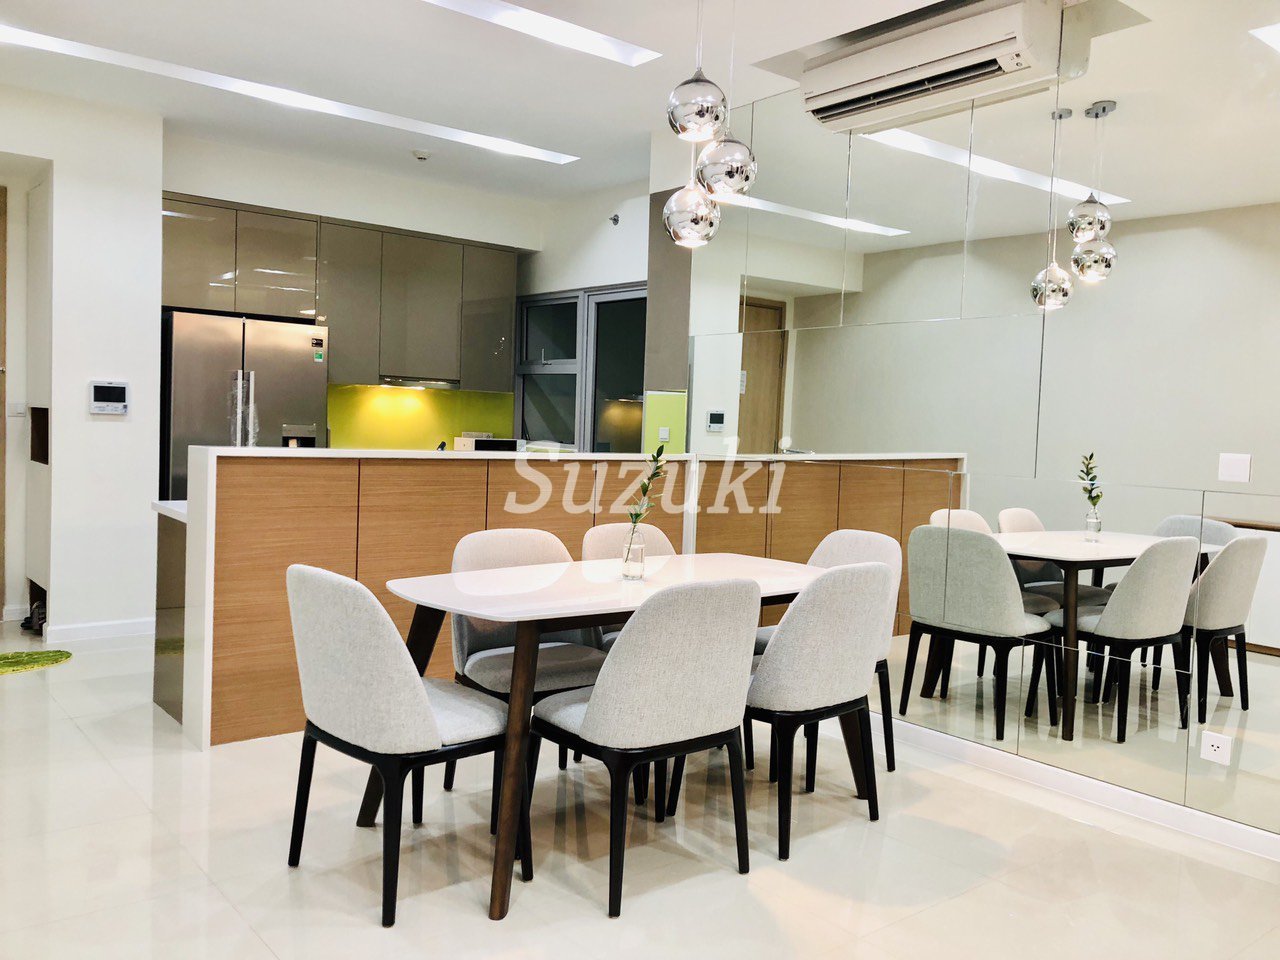 With full interior and furniture, Estella Heights, Ho Chi Minh District 2 condo rental- S213081